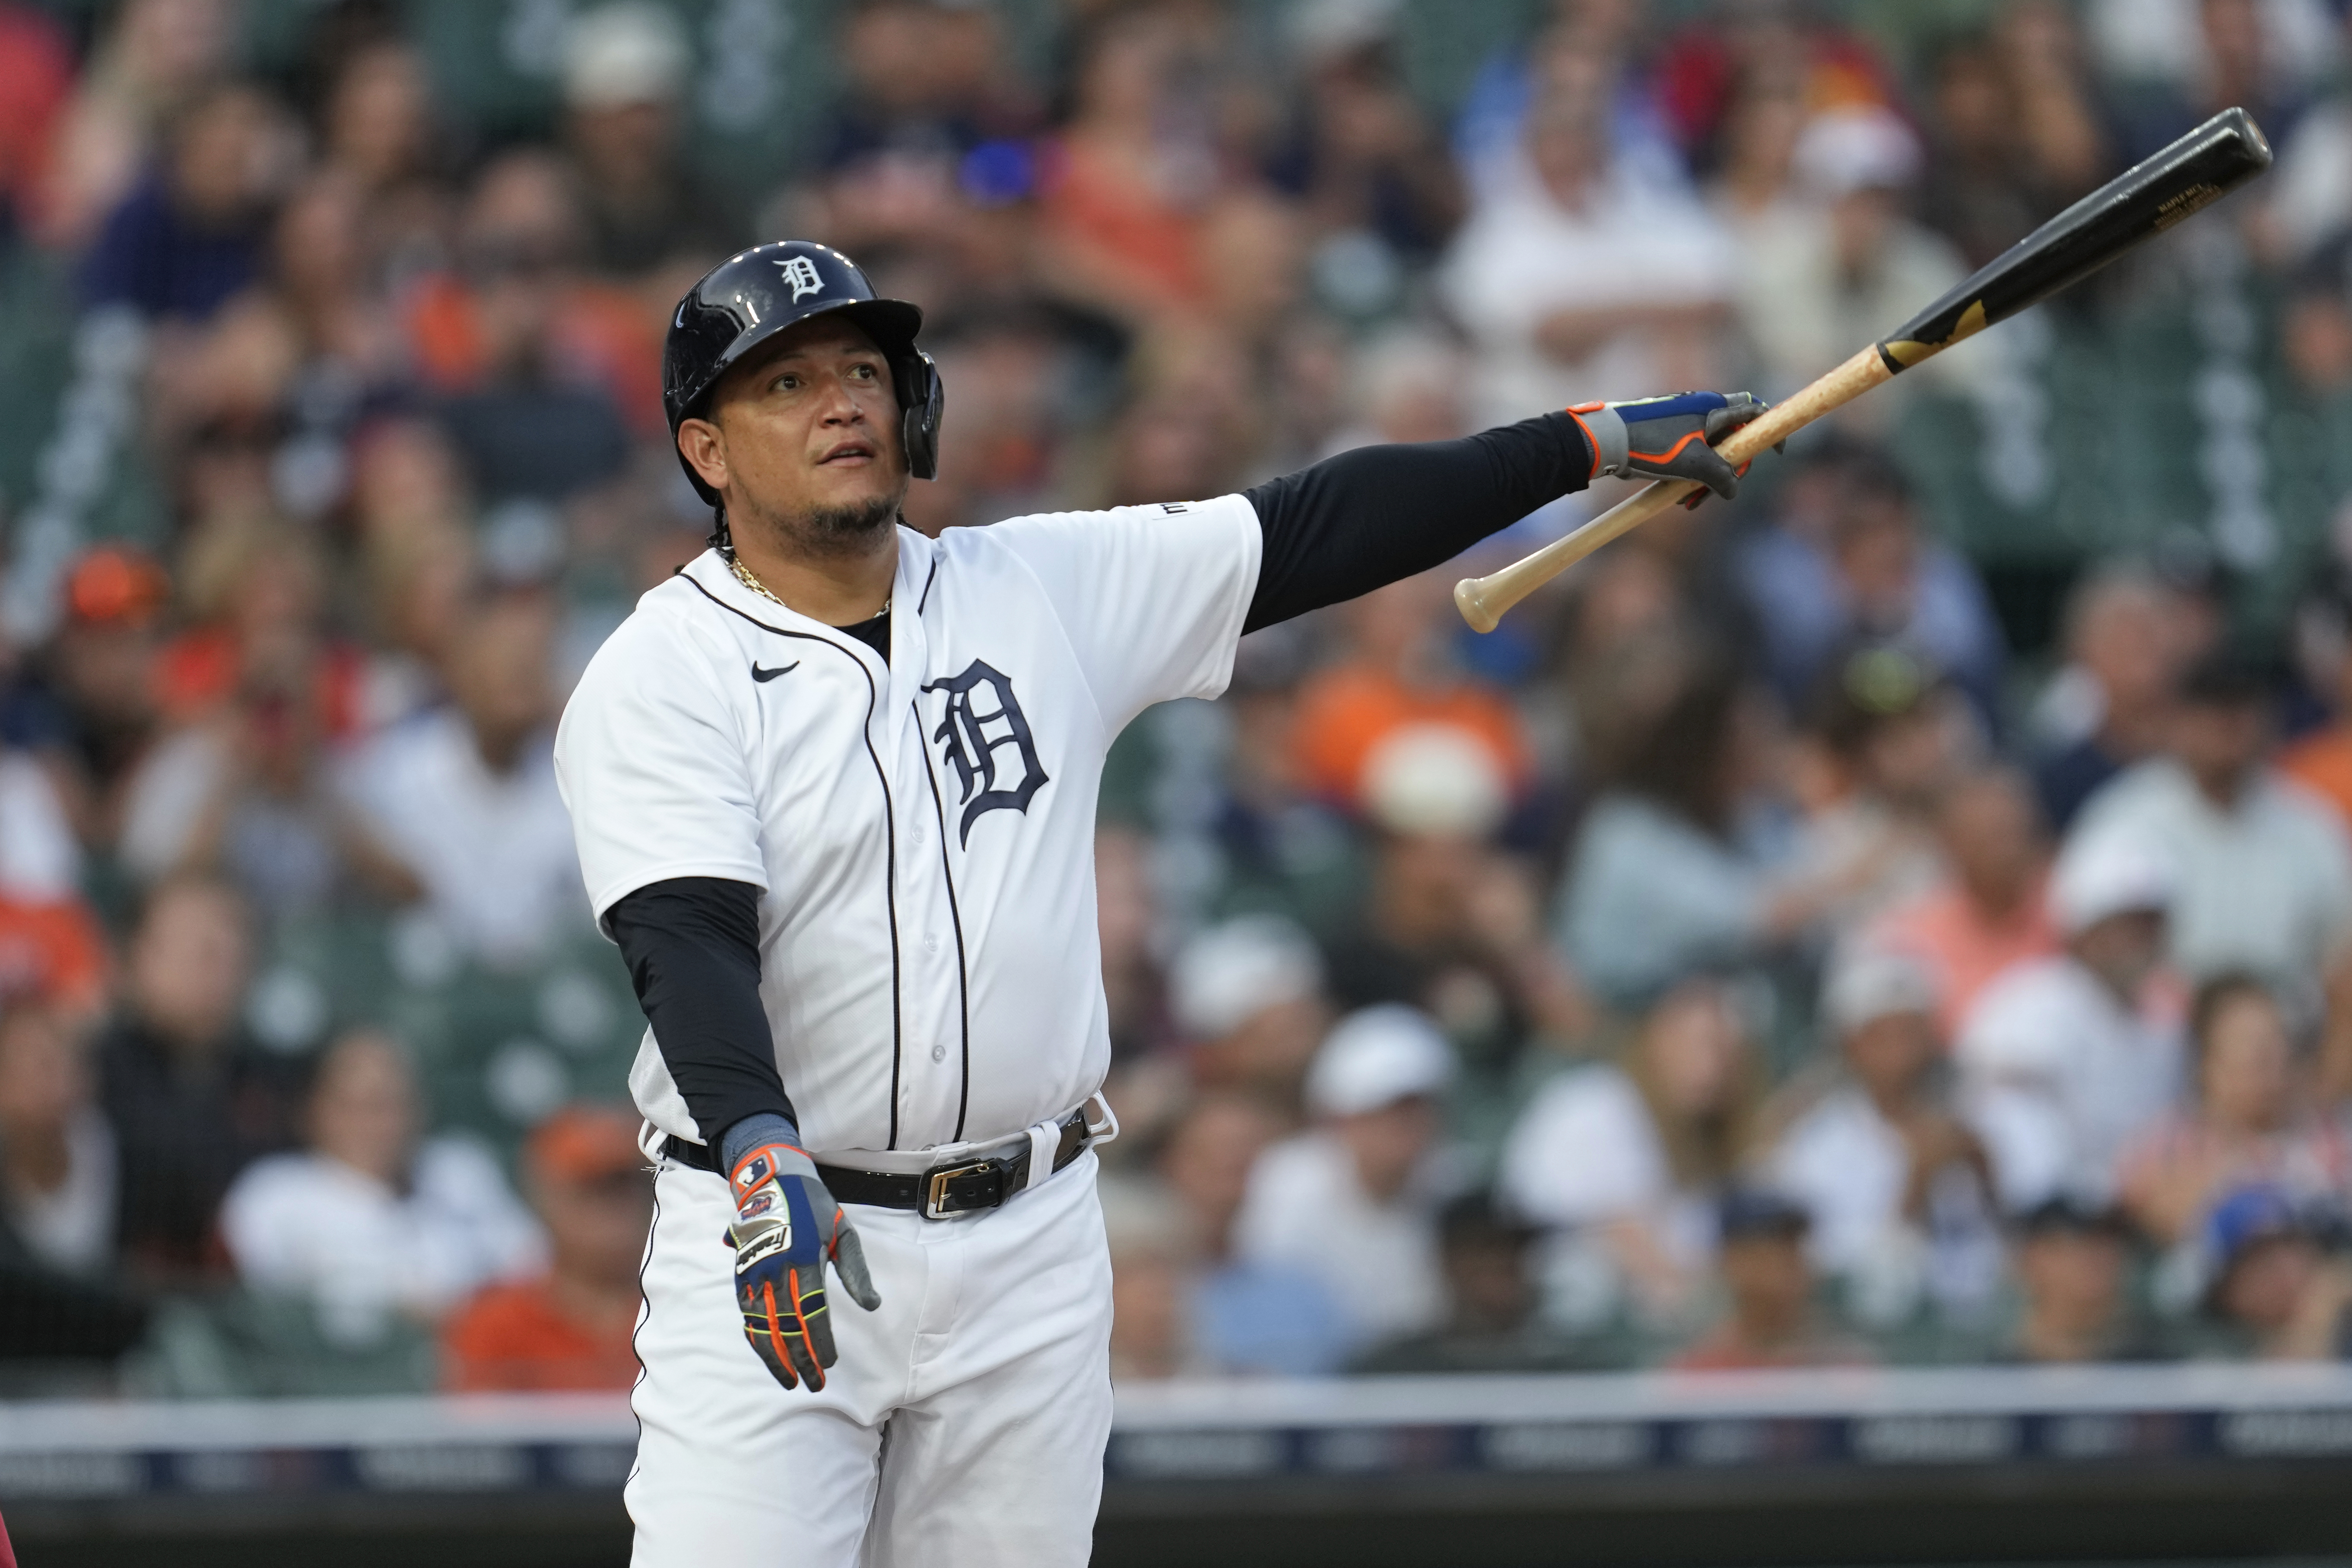 Miguel Cabrera's future with Detroit Tigers uncertain amid knee issue